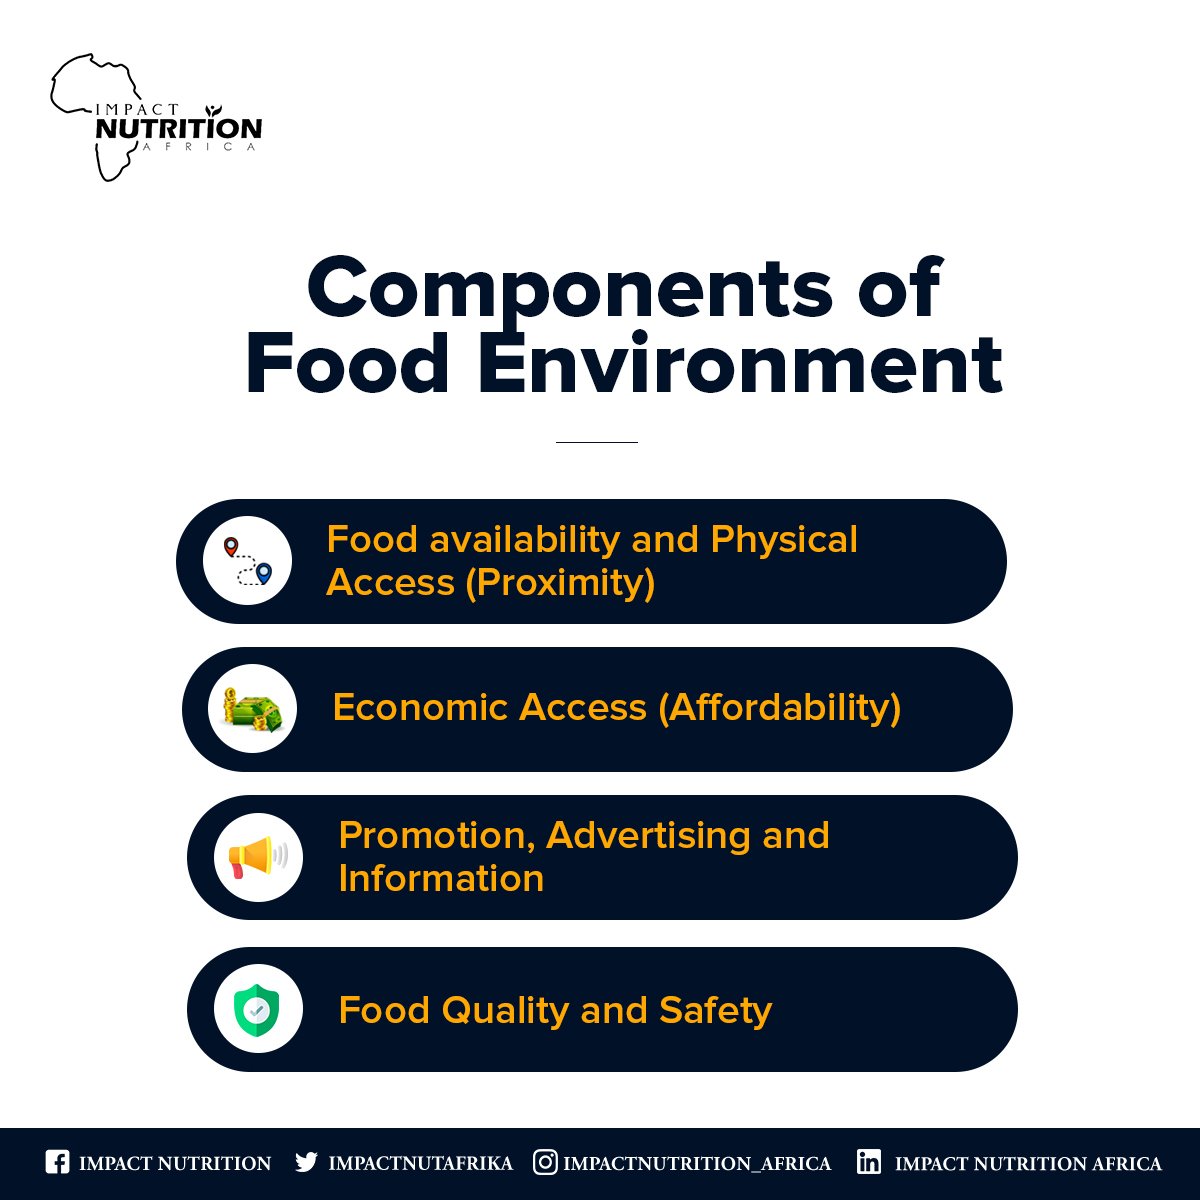 Physical and economic access to food aided by infrastructures, food traditions, food adverts as well as food quality & safety are major factors that influence the foods available in a locality. 

#FoodSystems #FoodEnvironment 

twitter.com/ImpactNutAfrik…